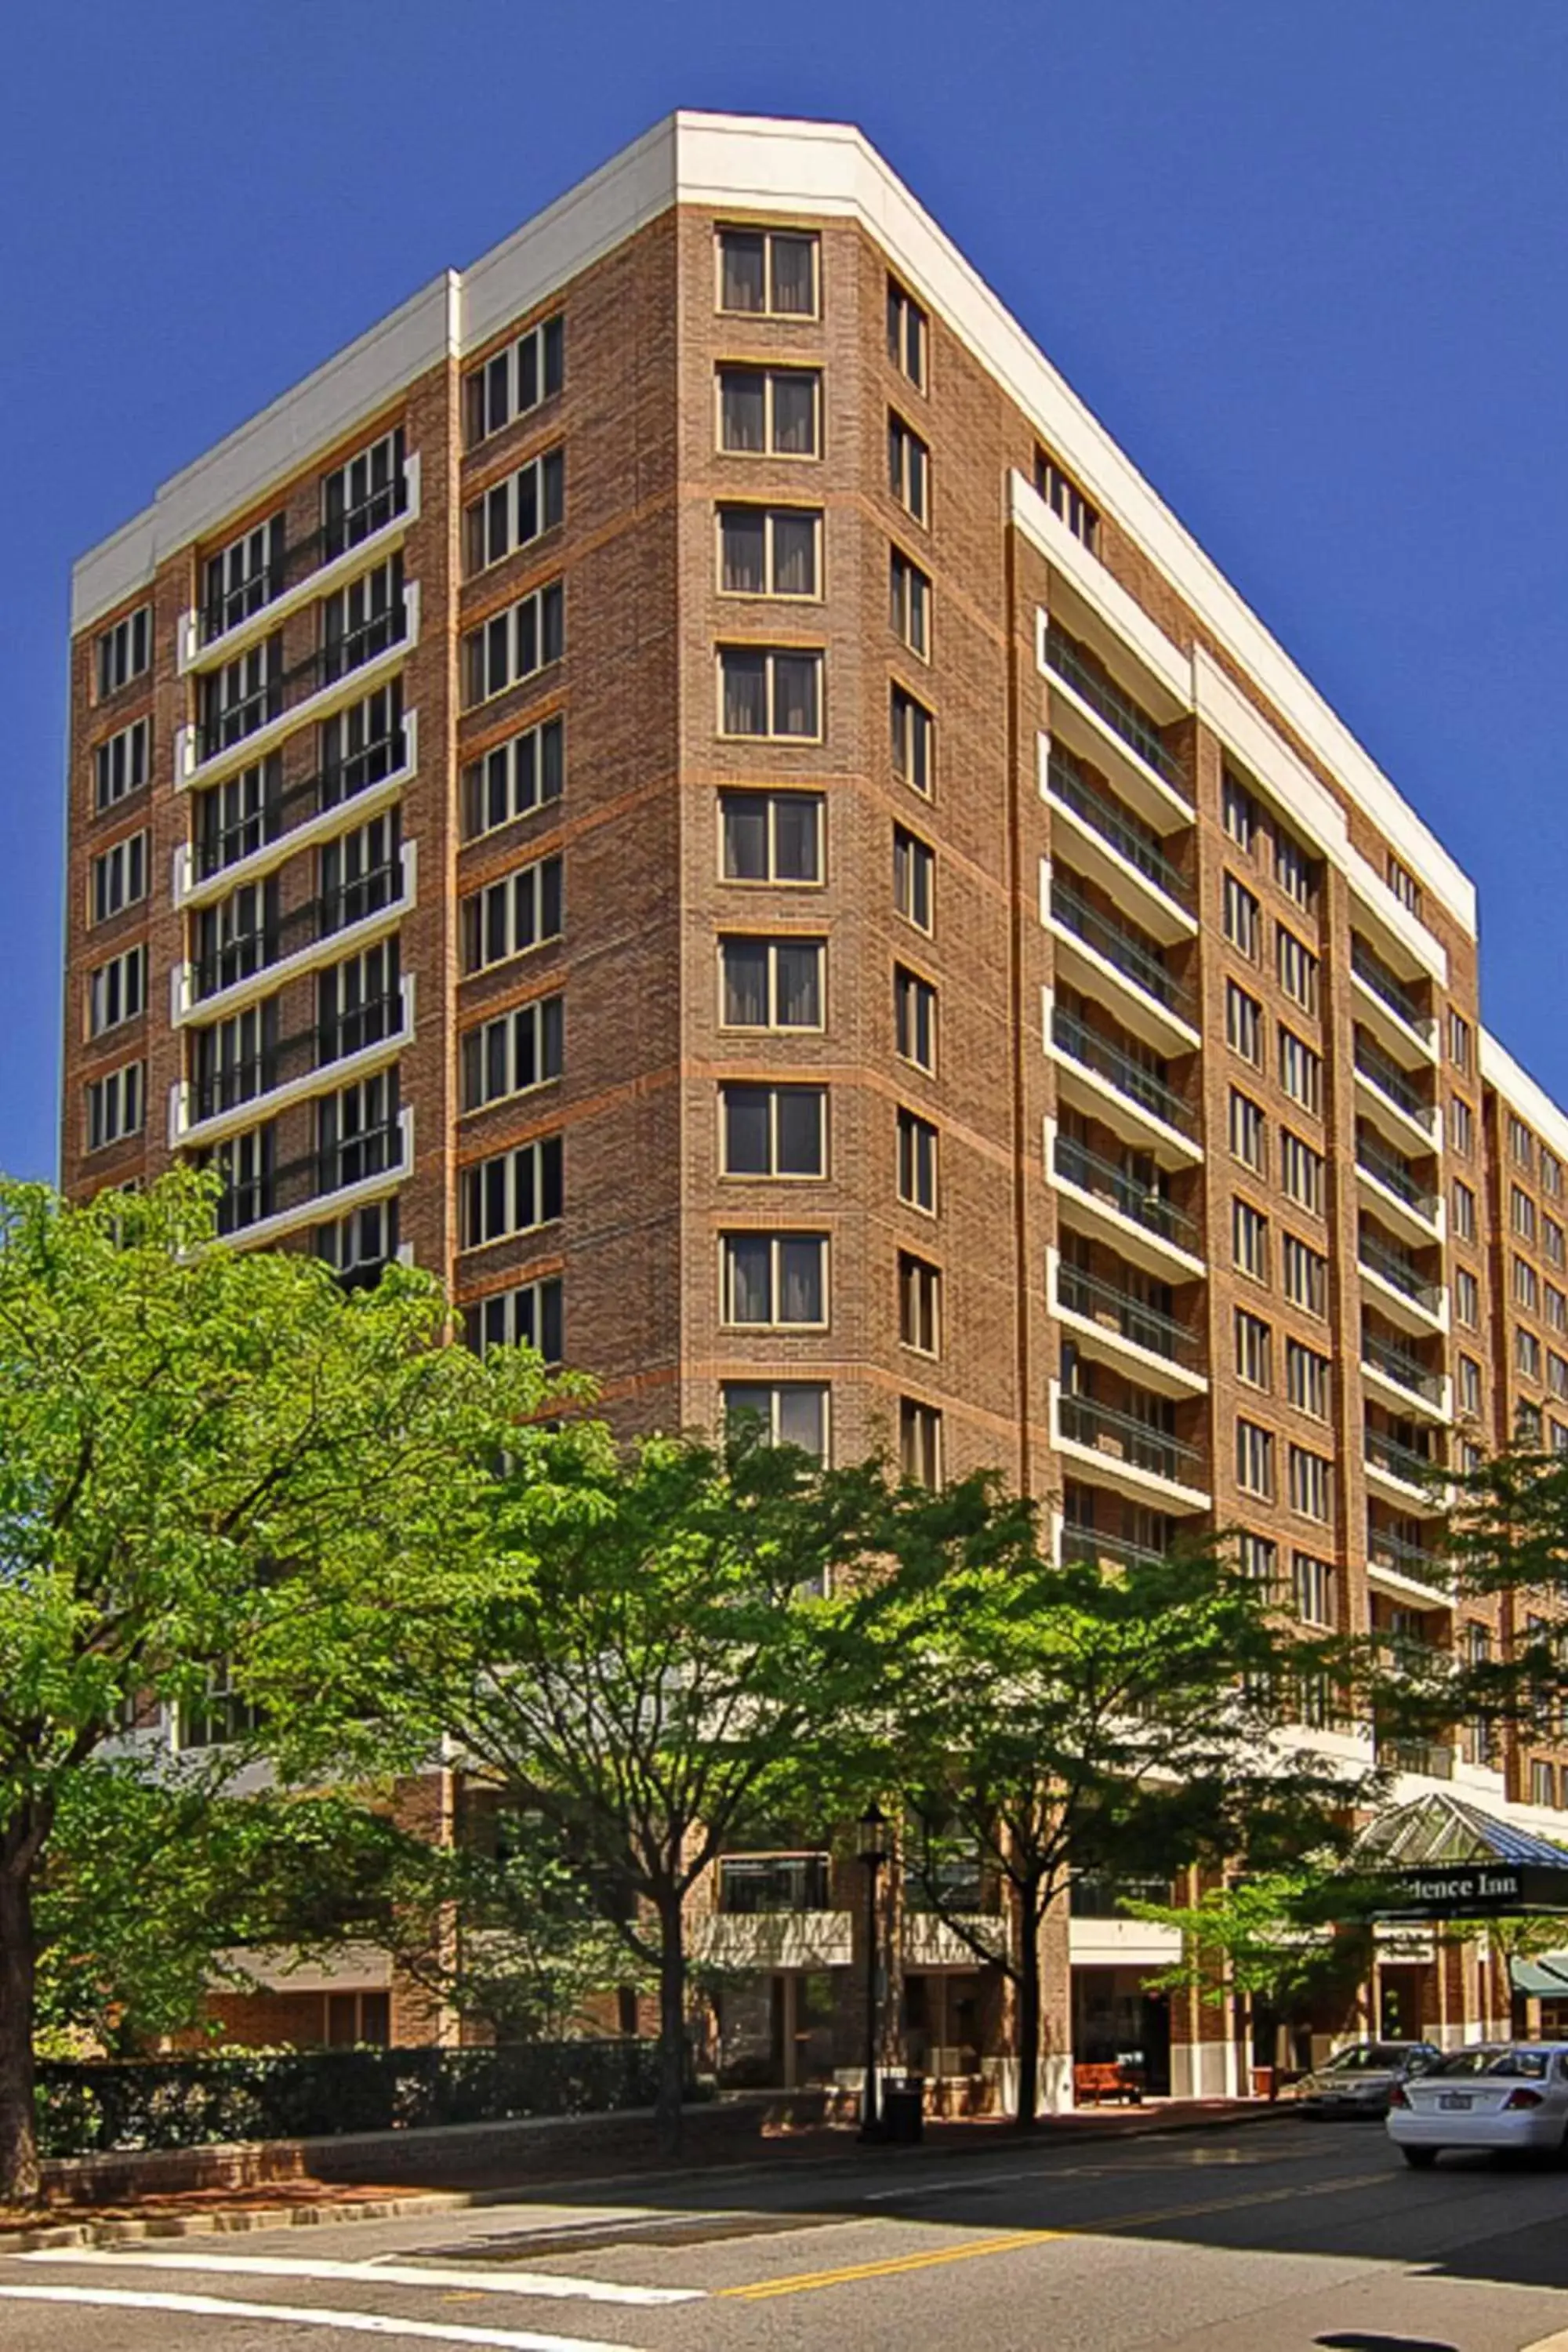 Property Building in Residence Inn Bethesda Downtown